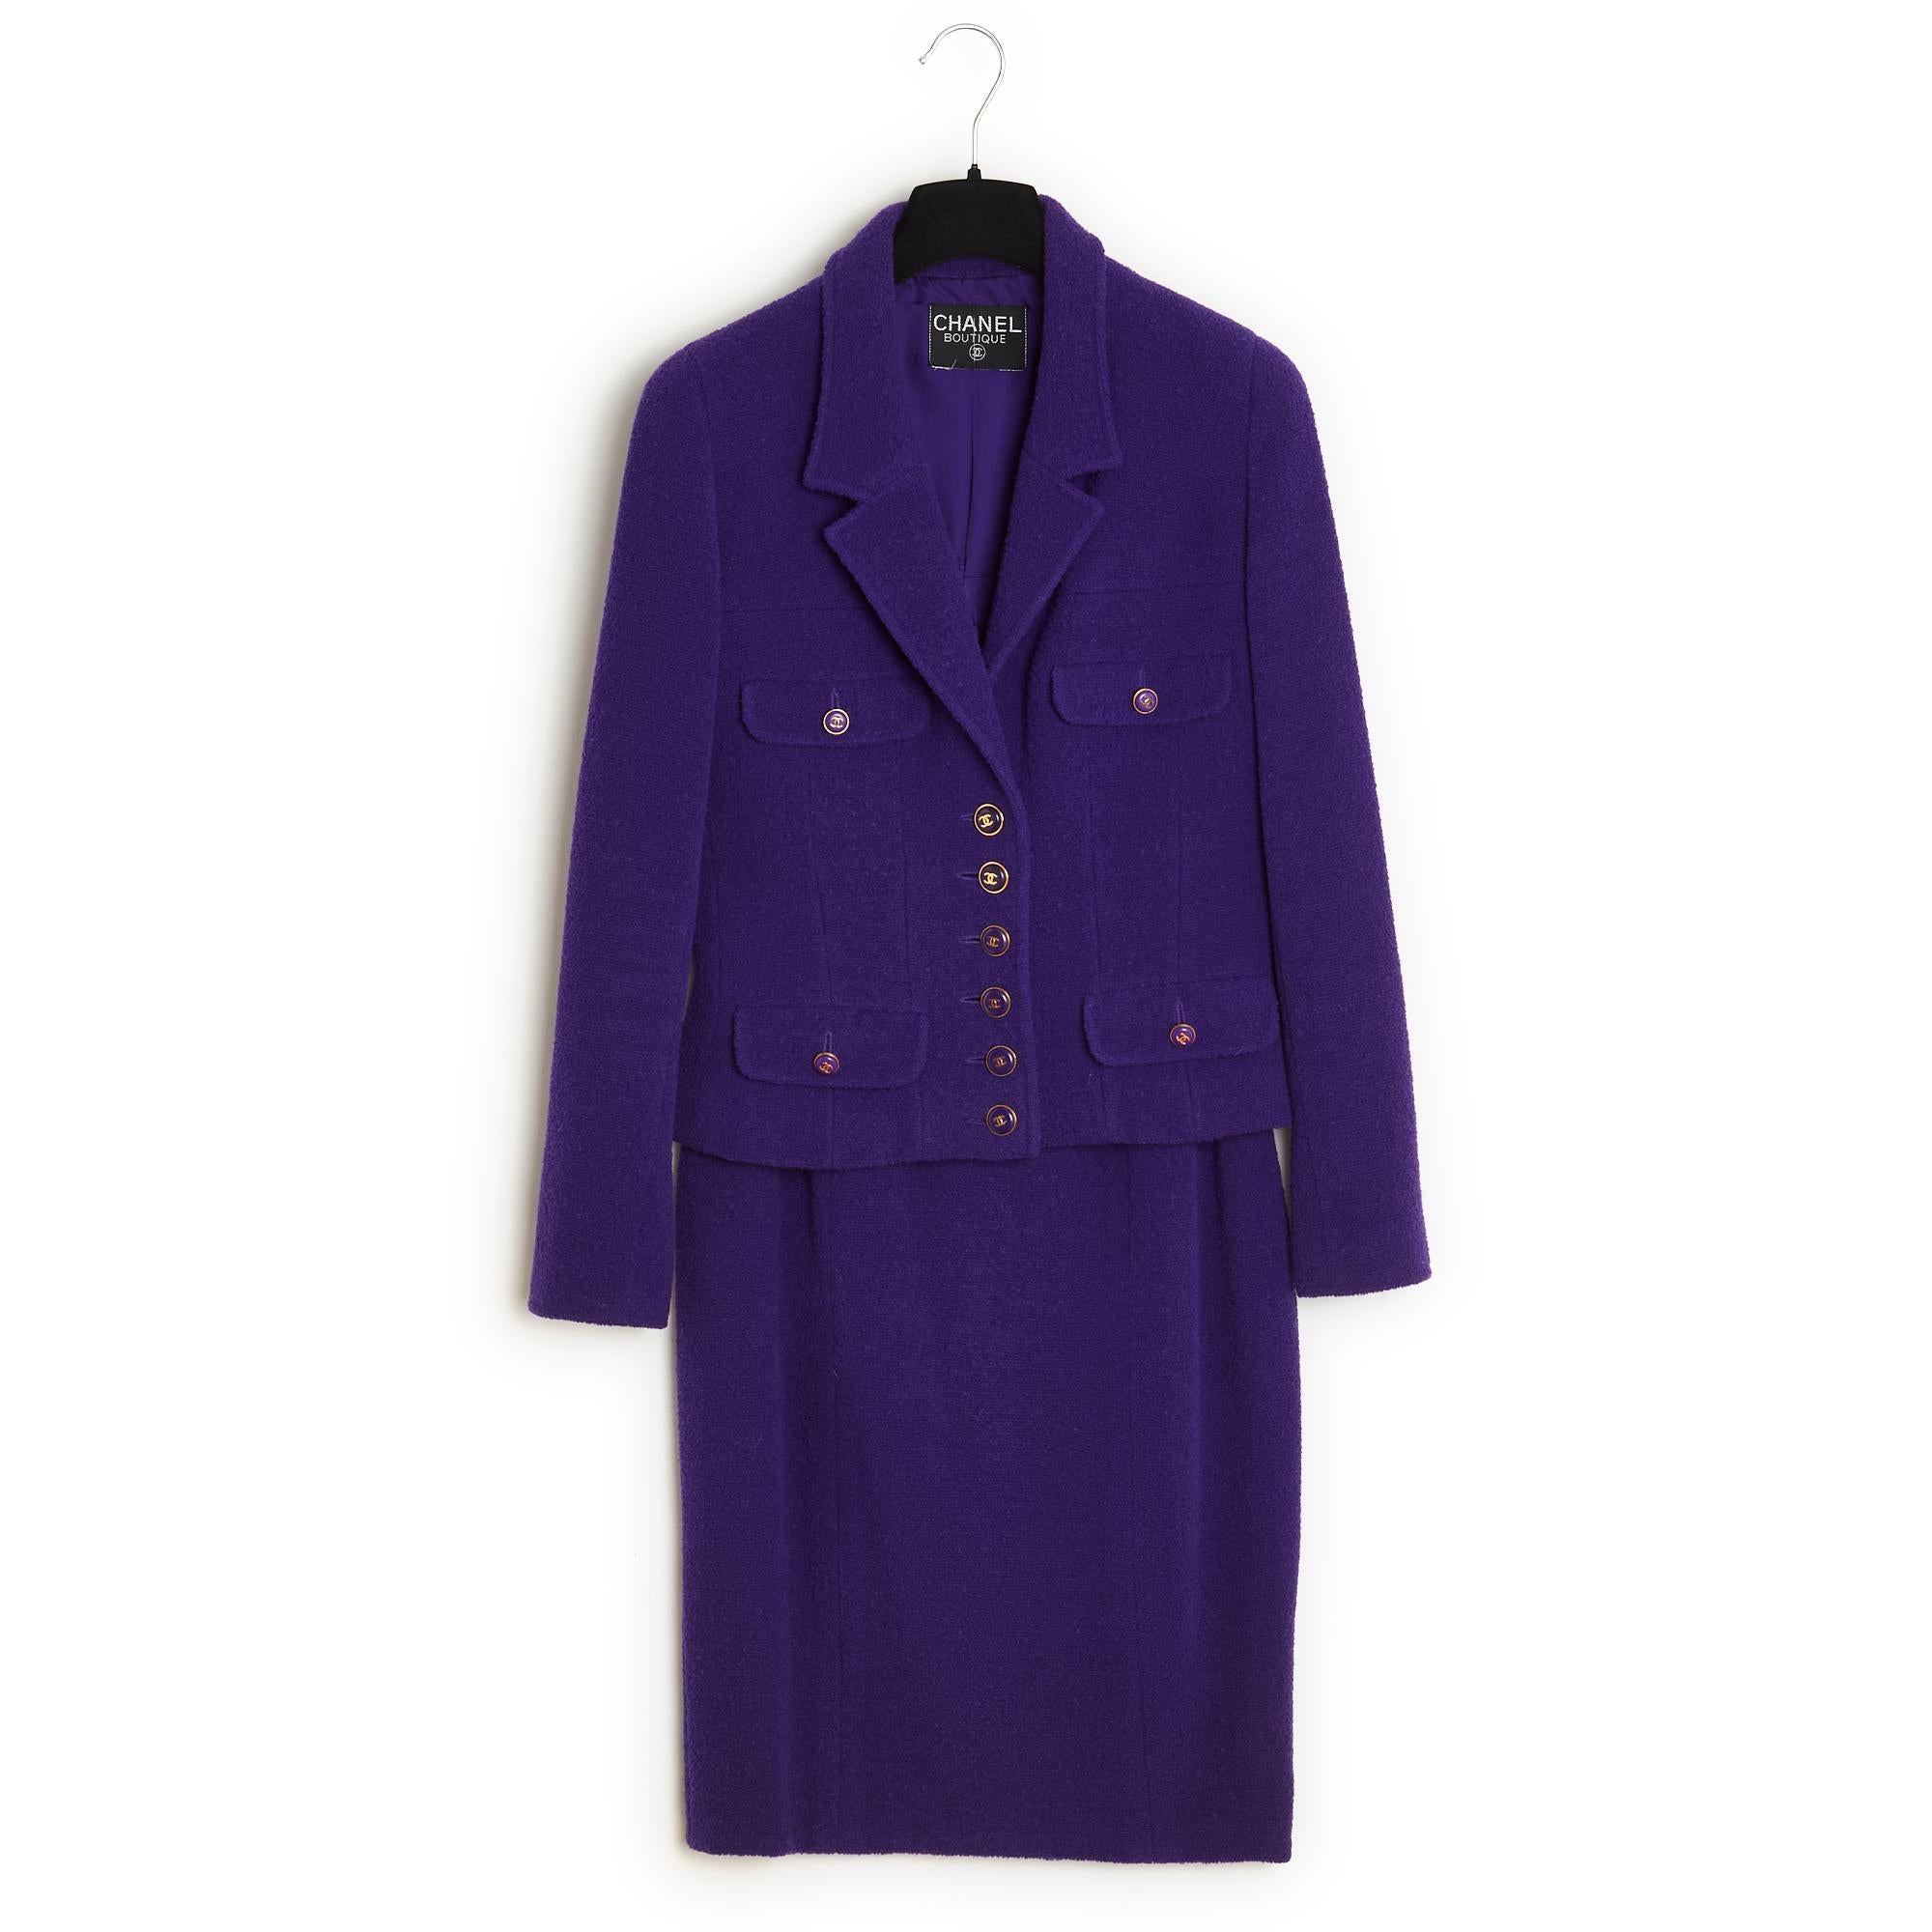 Chanel suit jacket from the Fall Winter 1995 collection in dense but dark purple terry wool, composed of a jacket with a notched collar closed in front with 6 purple resin buttons decorated with a CC logo, 4 buttoned patch pockets at the chest and